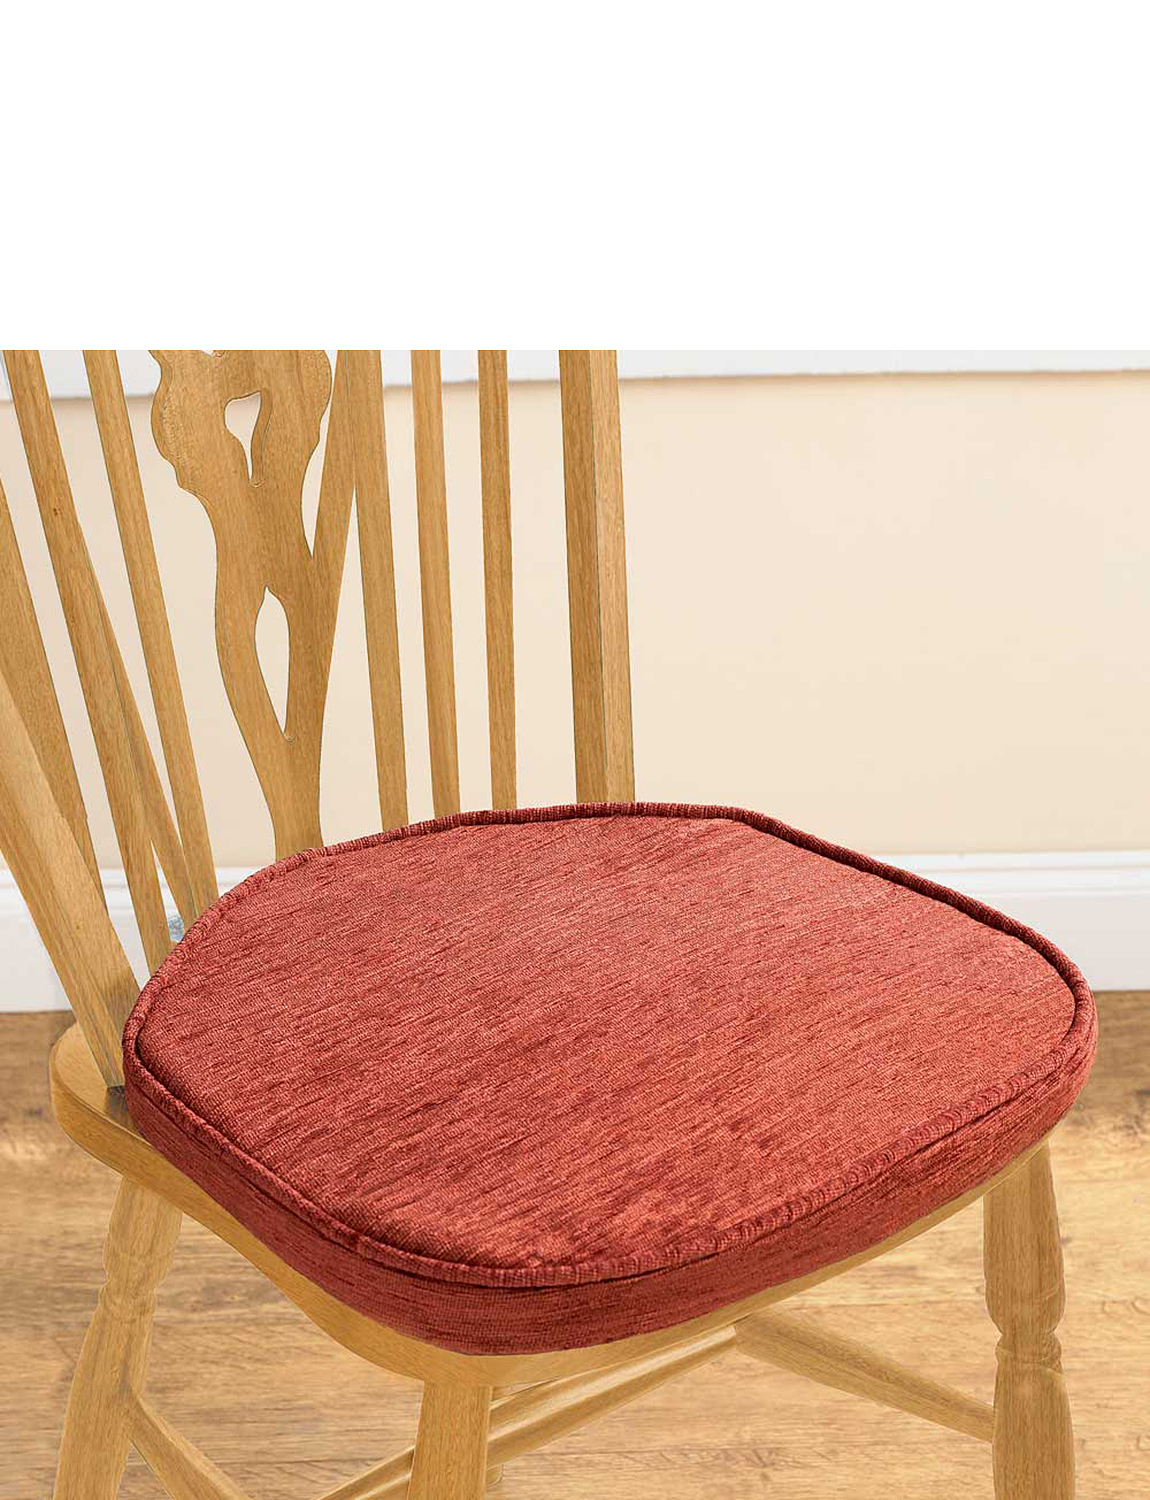 Dining Room Chair Seat Pads : lessecretsdemarie : Upgrade your dining